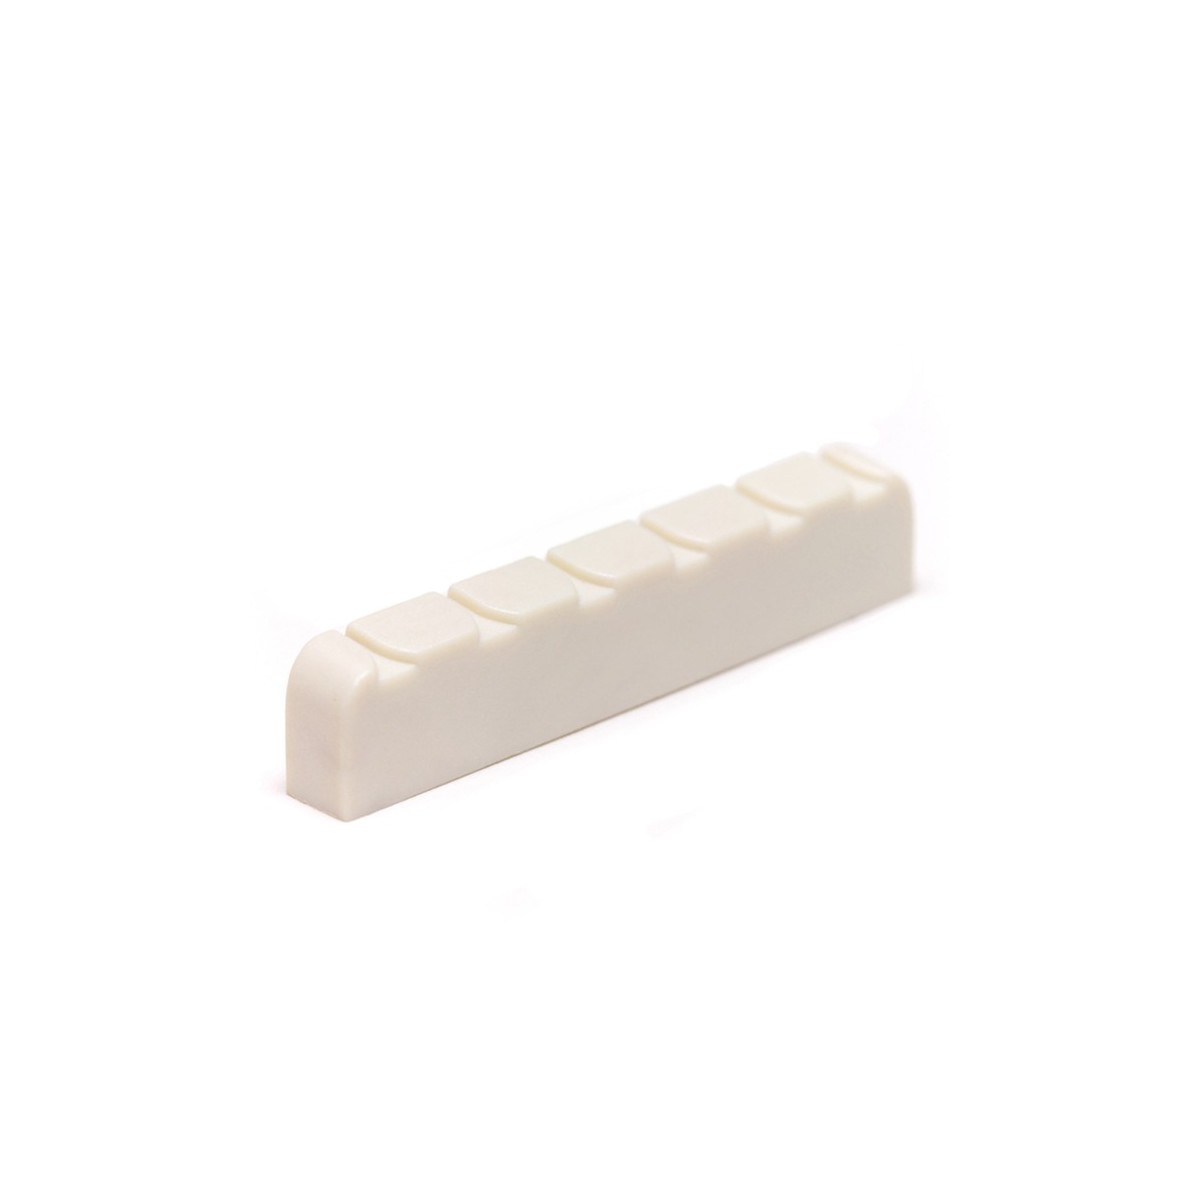 NUBONE NUTS LC6200 CLASSICAL SLOTTED